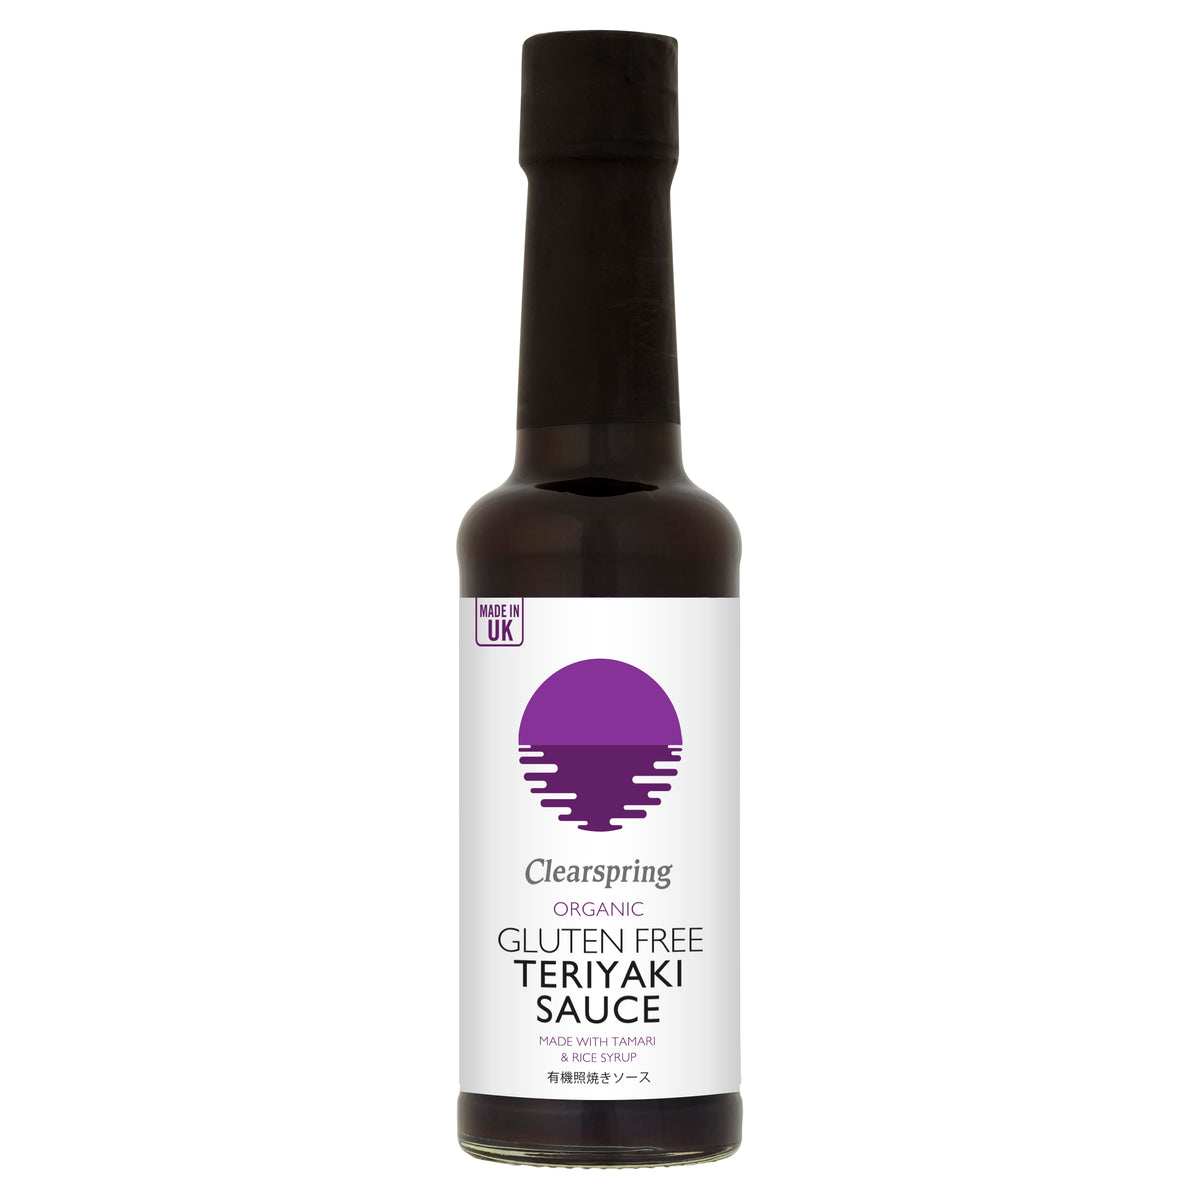 Gluten-Free Teriyaki Sauce 150ml | Clearspring | Raw Living | Clearspring Gluten-Free Teriyaki Sauce is ideal for Basting, Glazing, and adding a deliciously sweet yet savoury flavour to Stir-Fries, Roasts &amp; Barbecues.